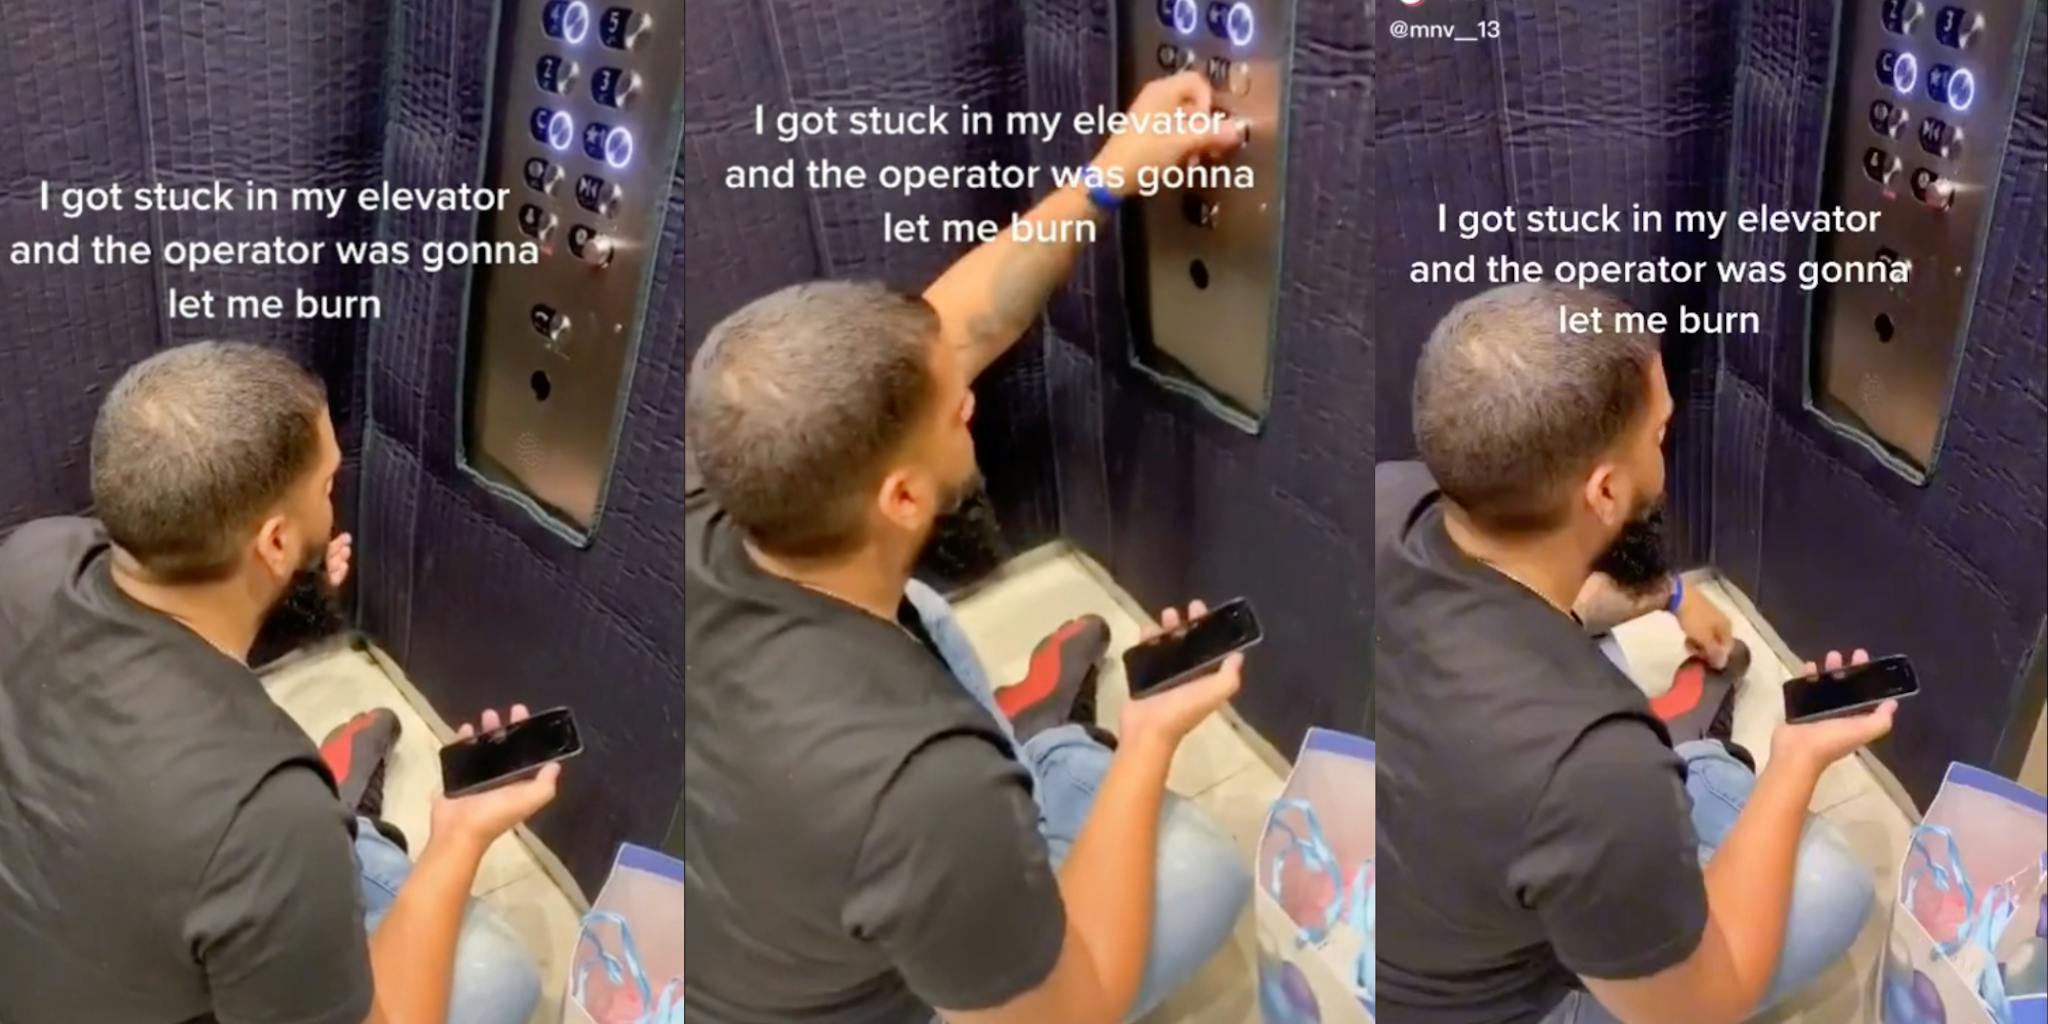 ‘What do you mean, ‘no?’: Elevator operator refuses to call 911 for trapped couple in viral TikTok, sparking debate